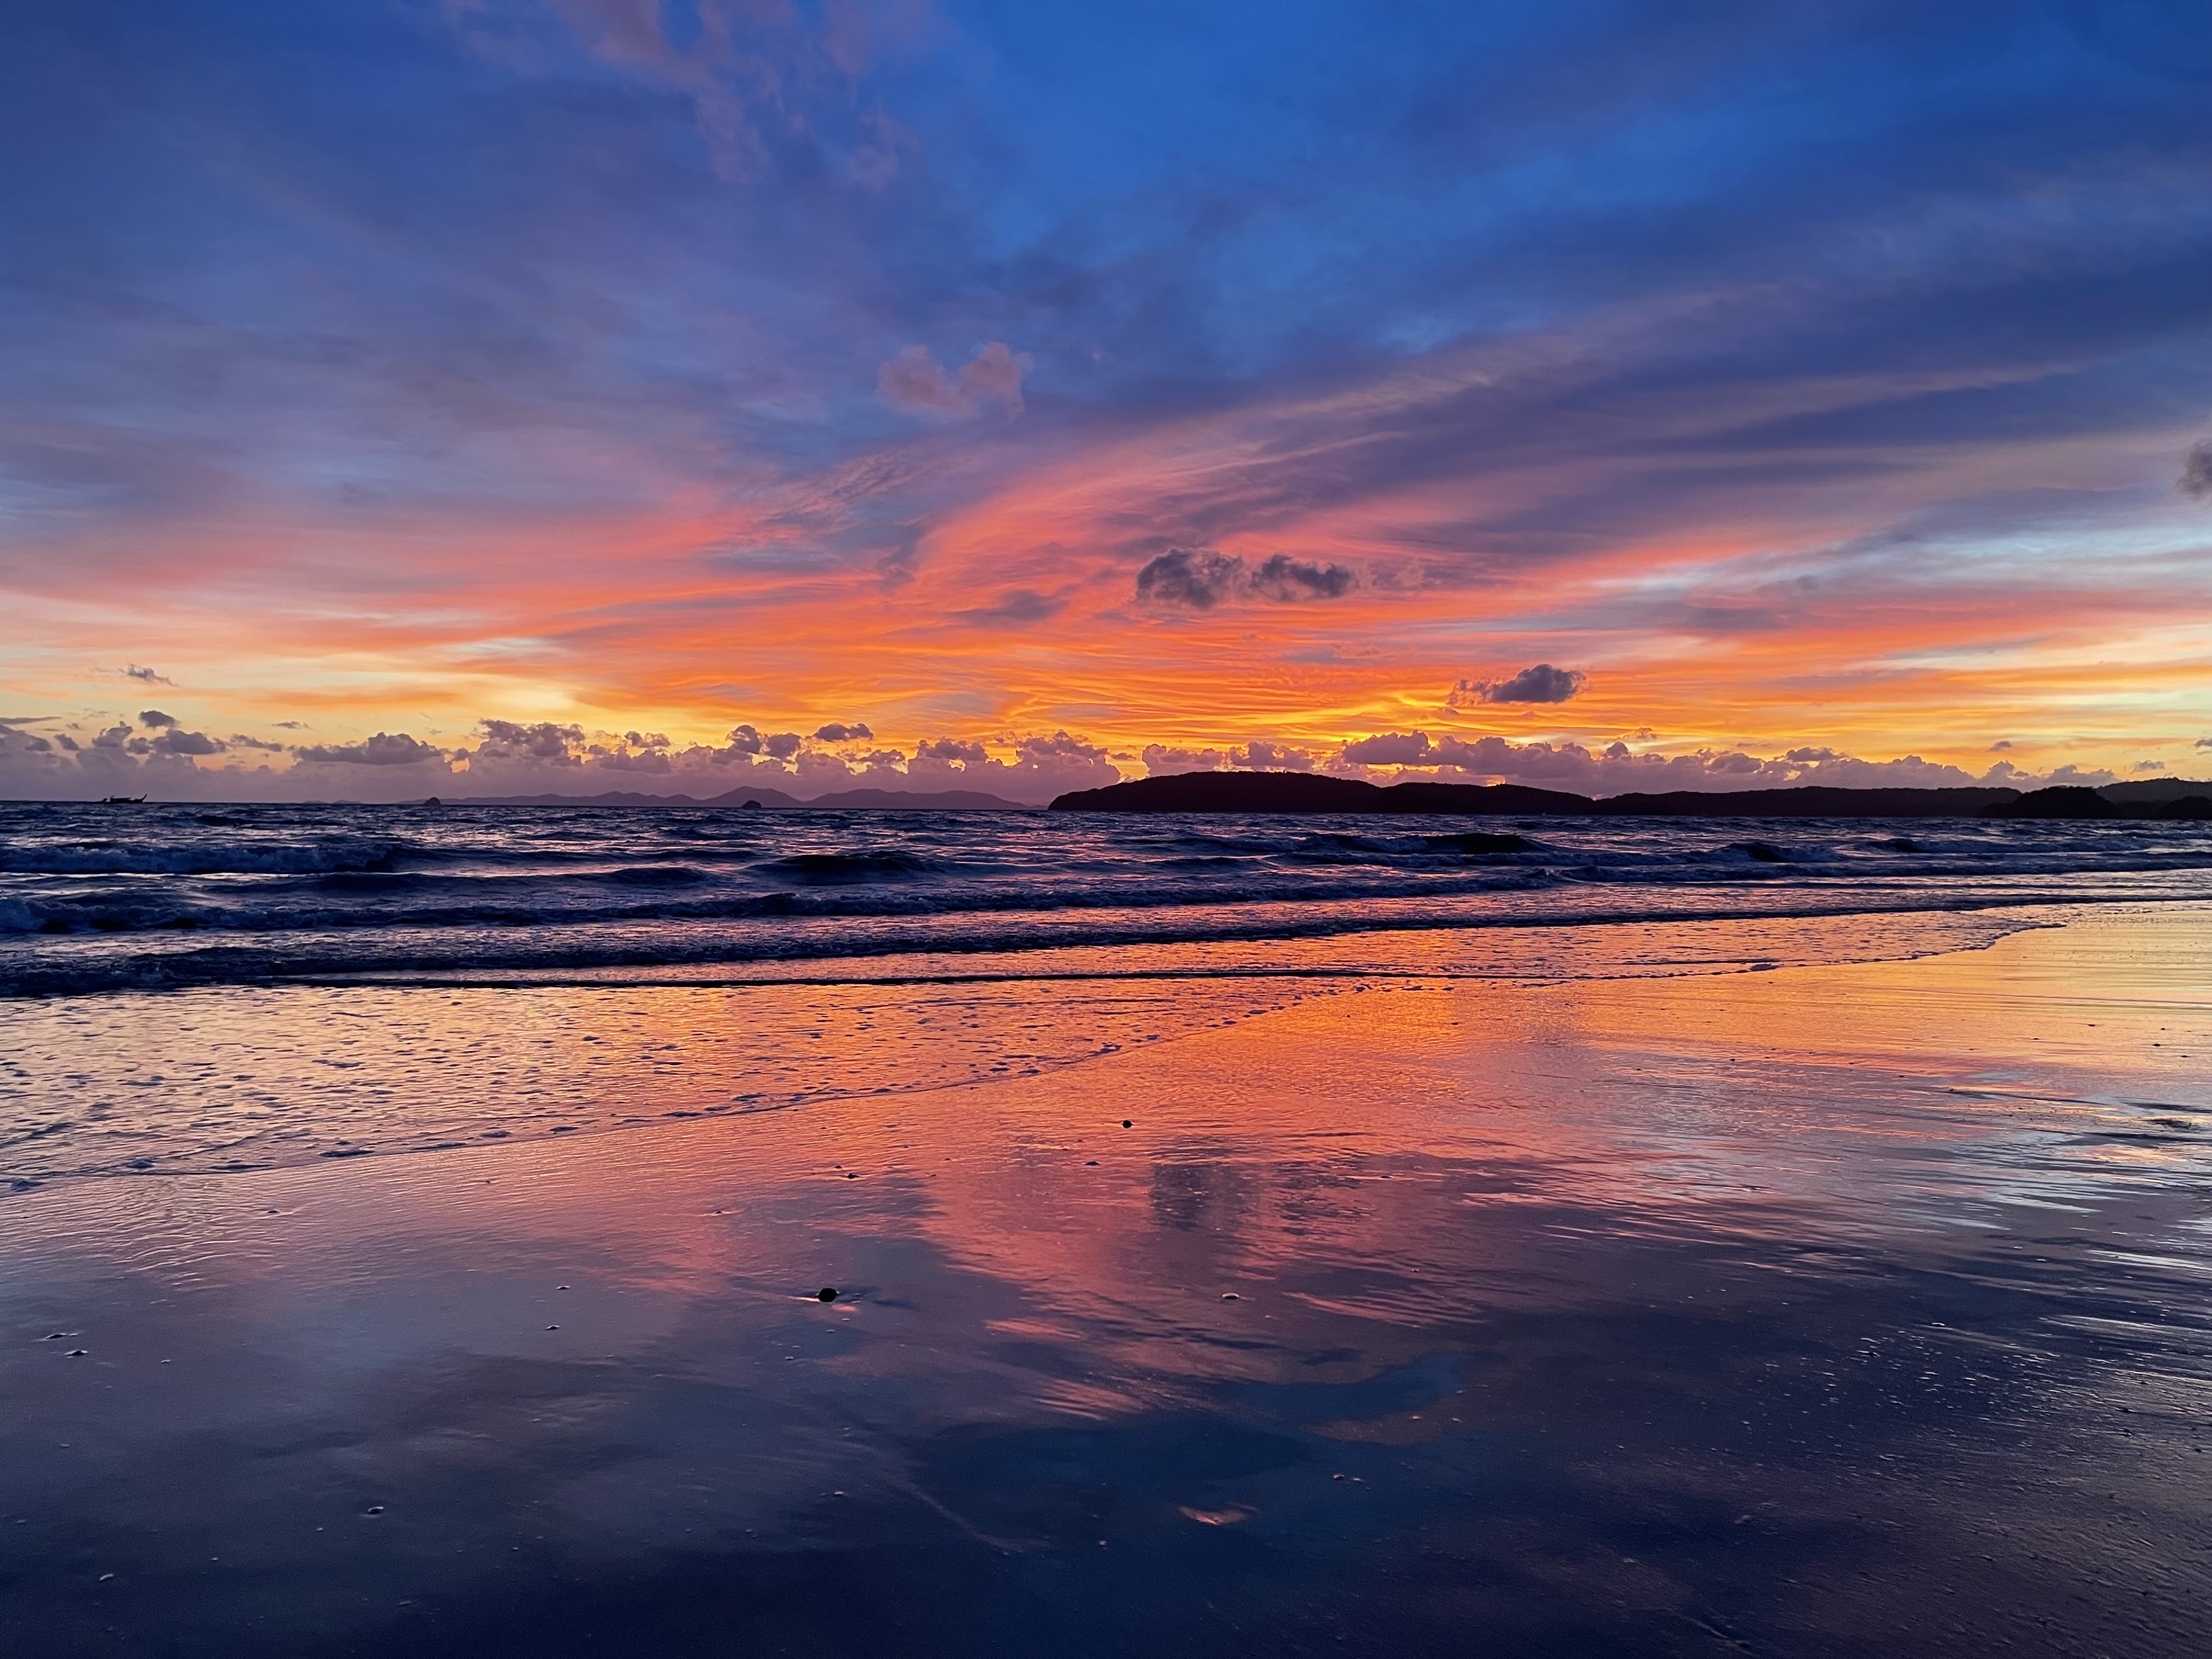 Sunset on the beach in Ao Nang, Thailand. Purples, oranges, and blues.